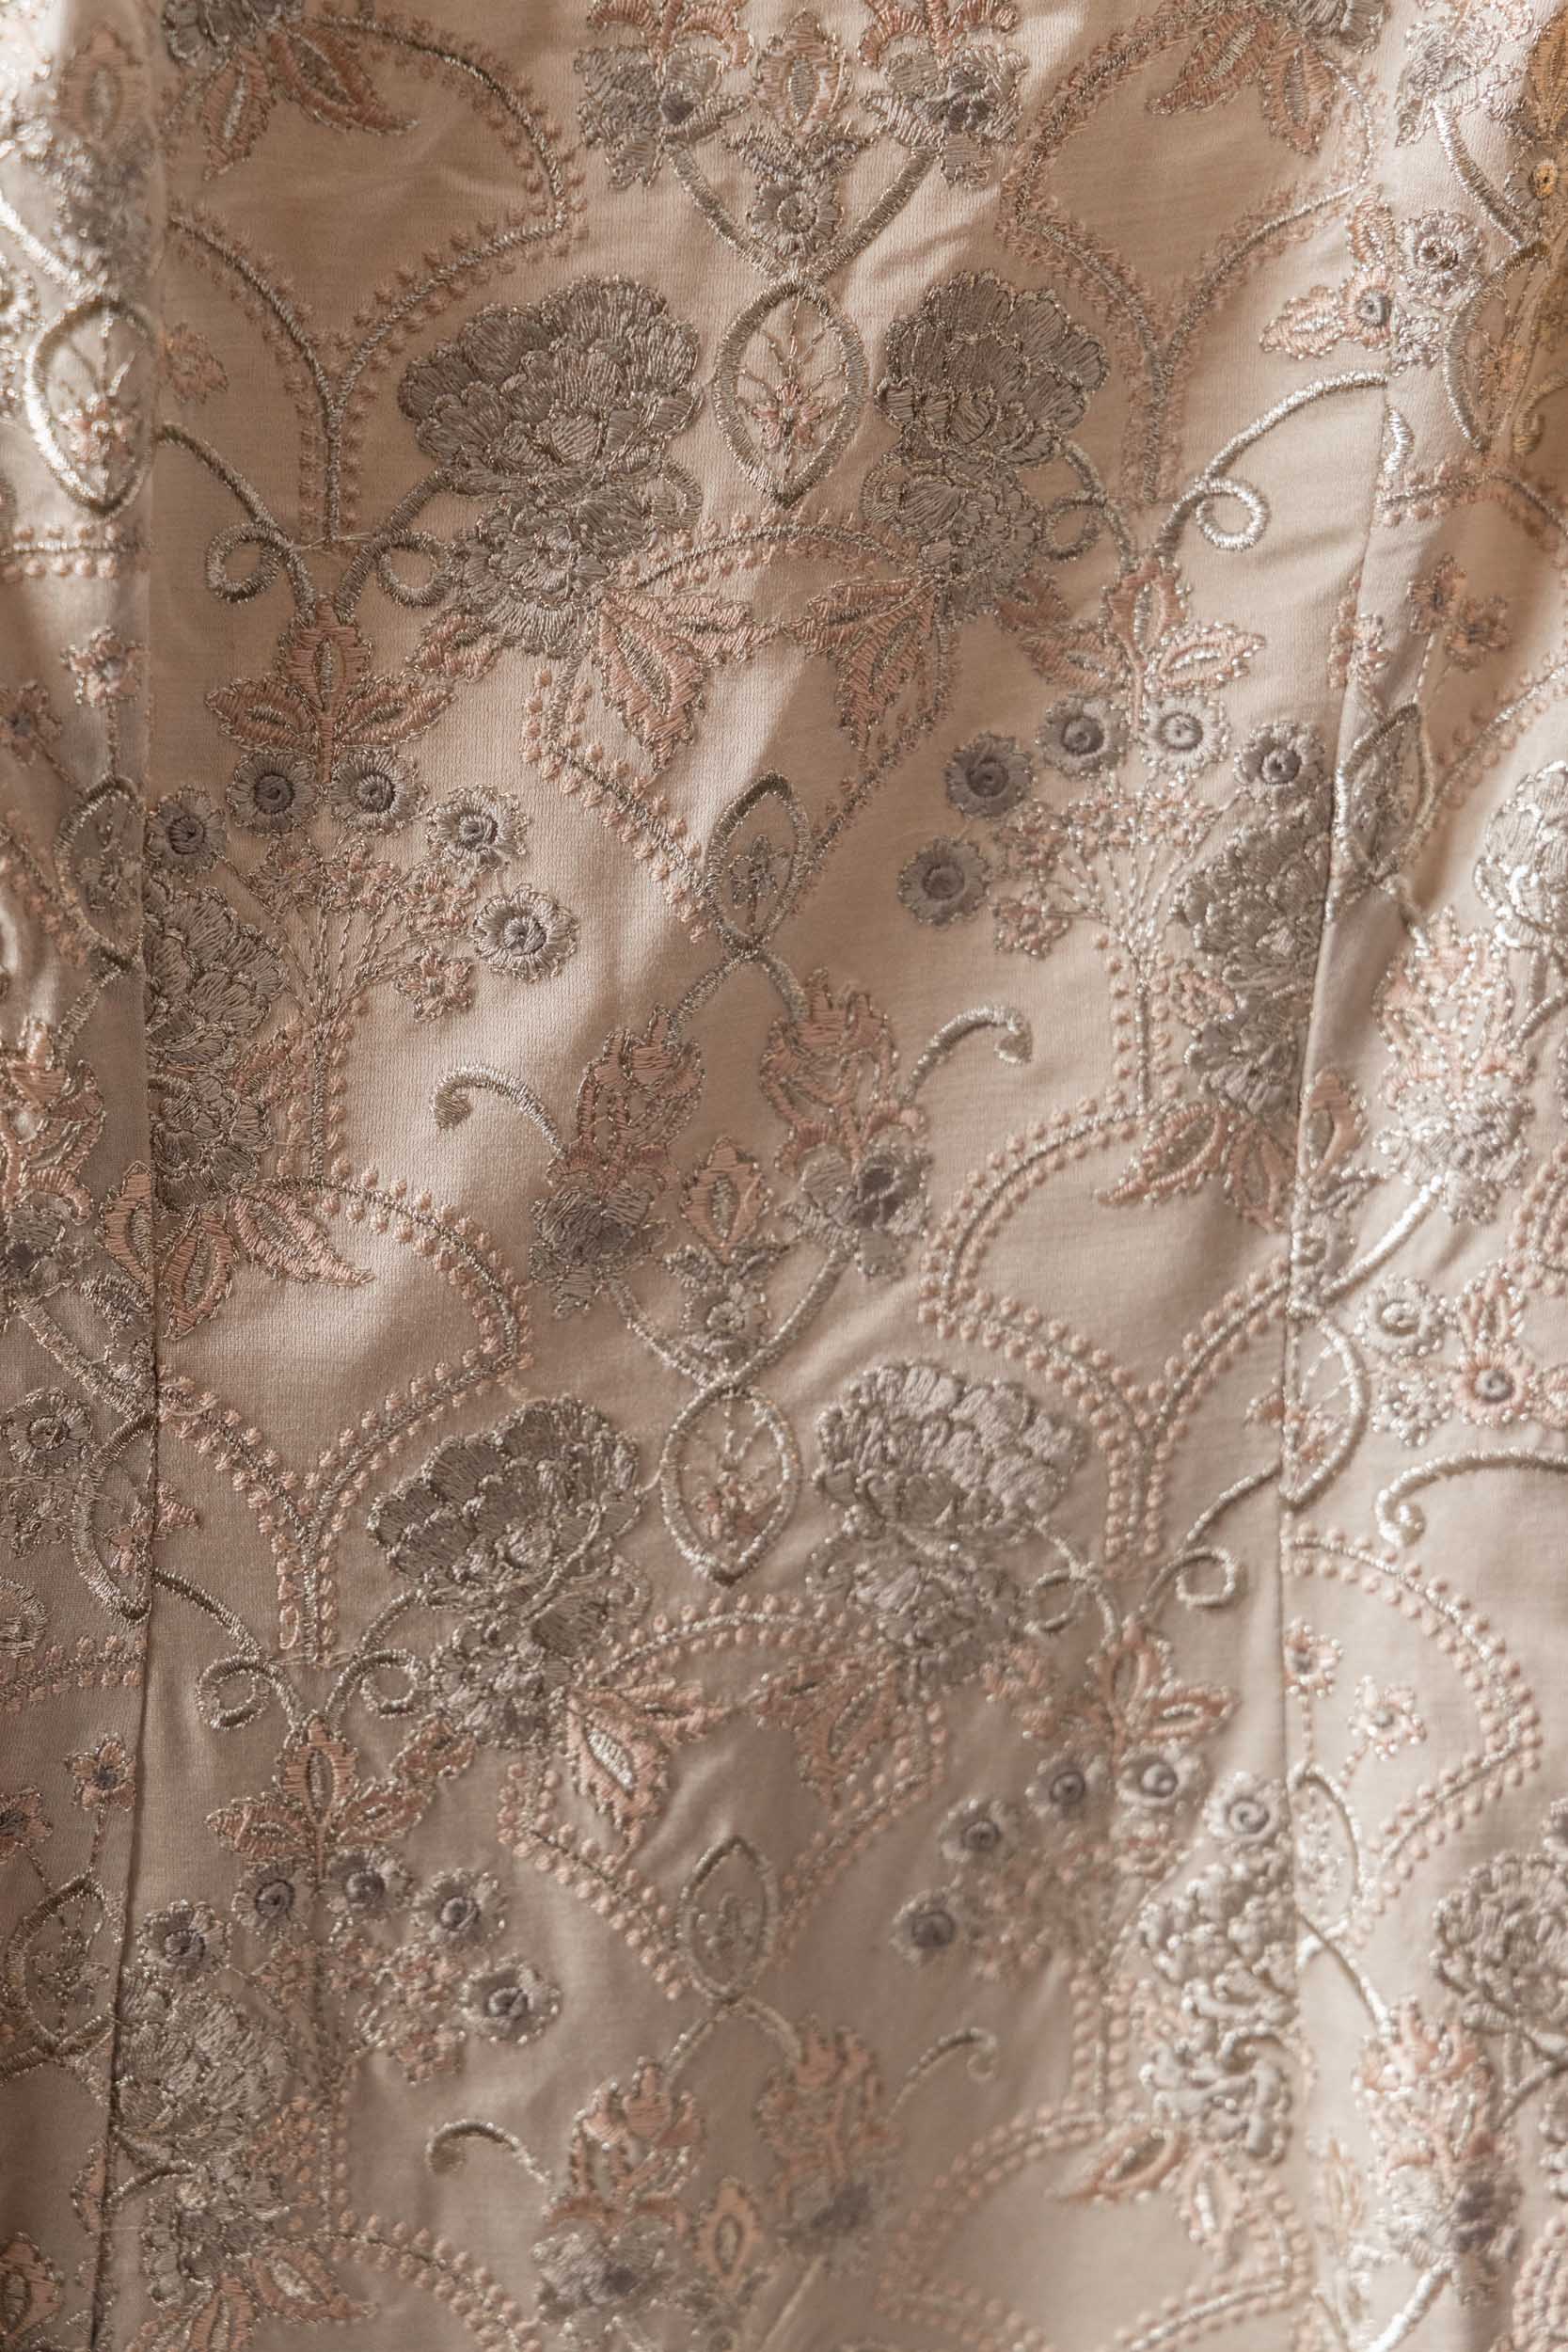 Beautiful nude embroidered fabric from a Sujata Gazder gown